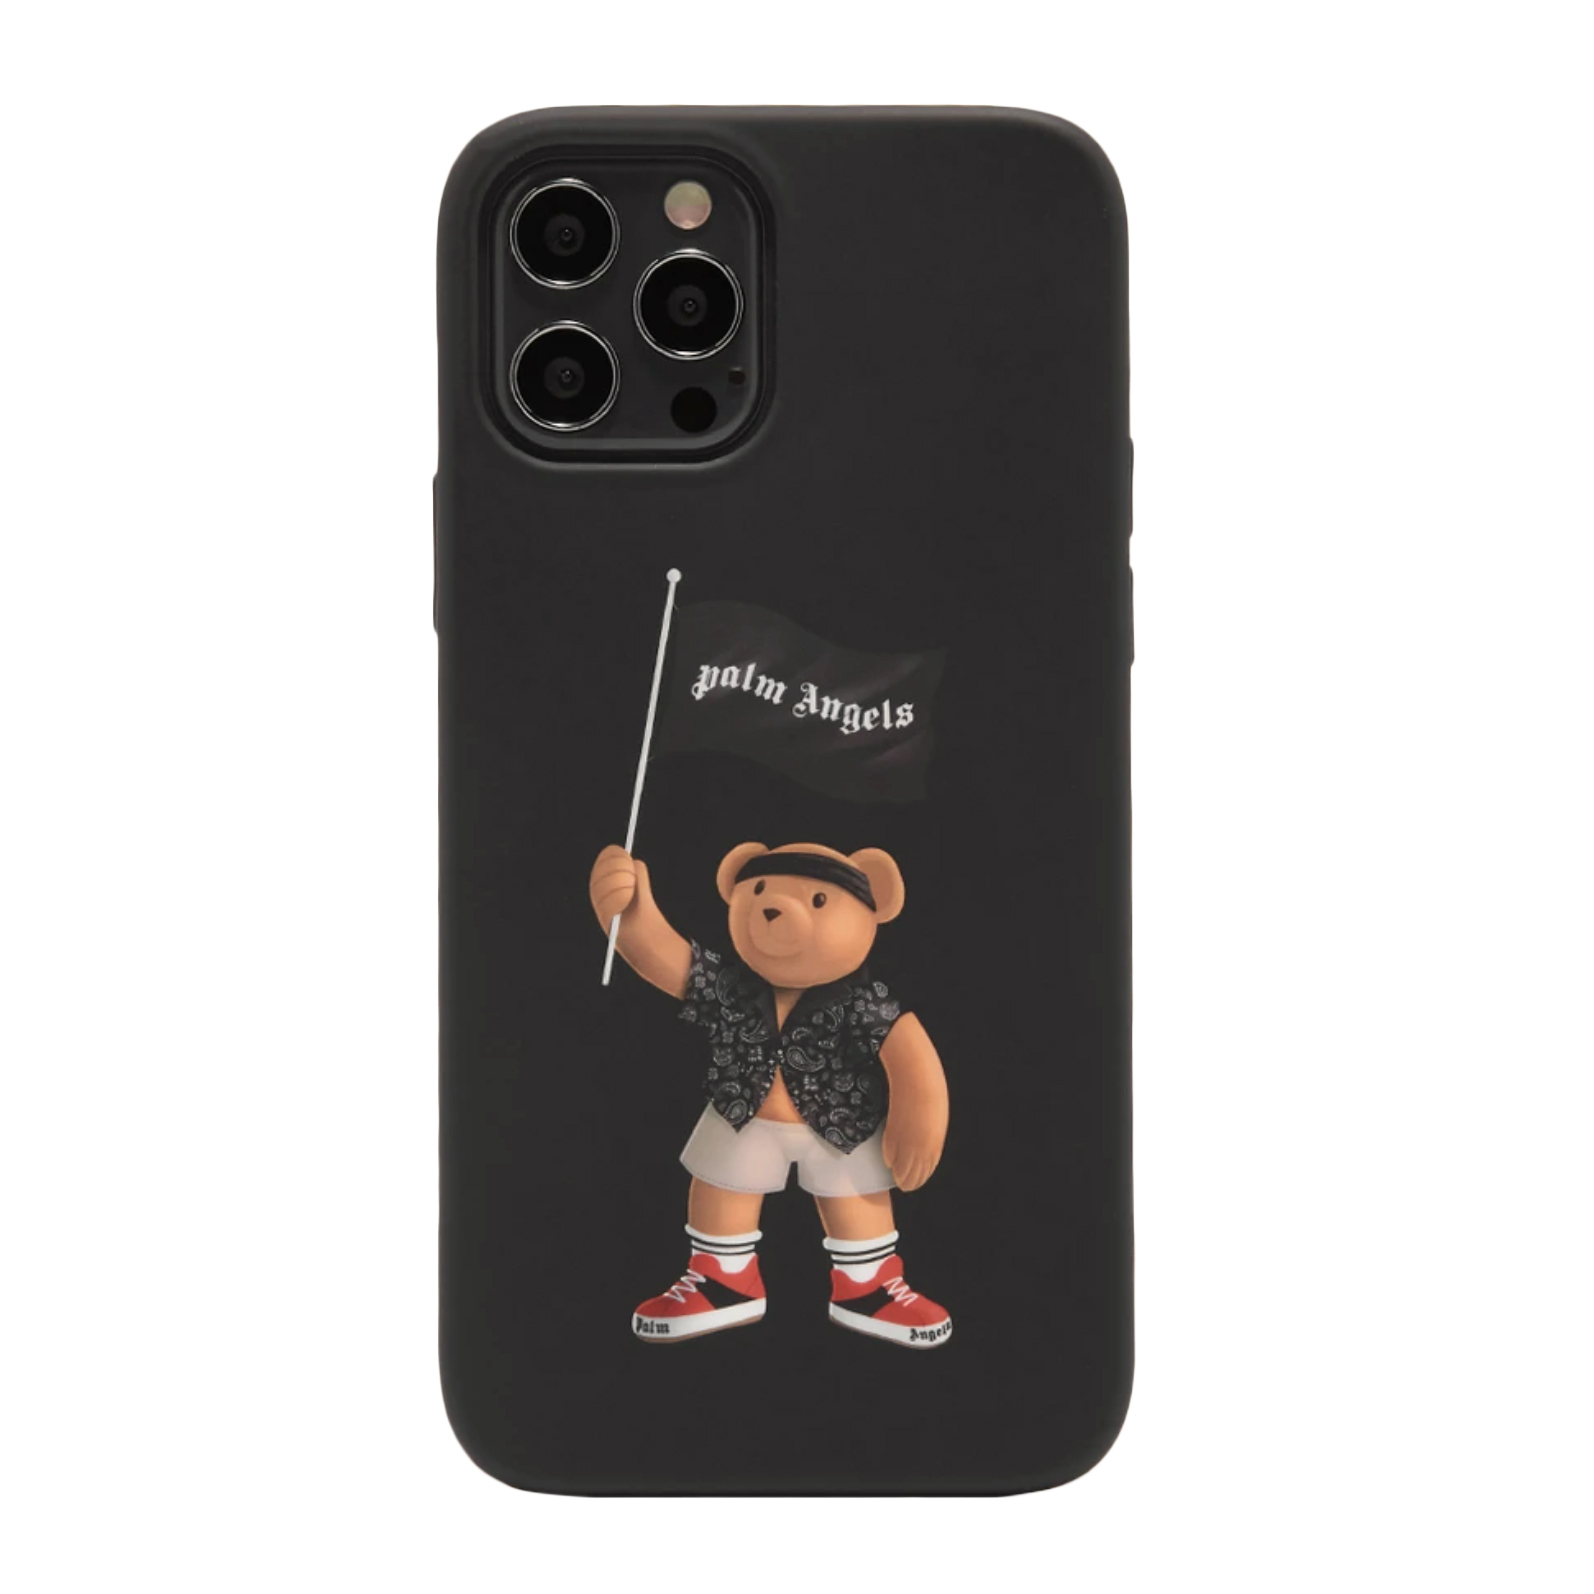 Palm Angels Pirate Bear iPhone 12 Pro Max Case Black - SS21 - US